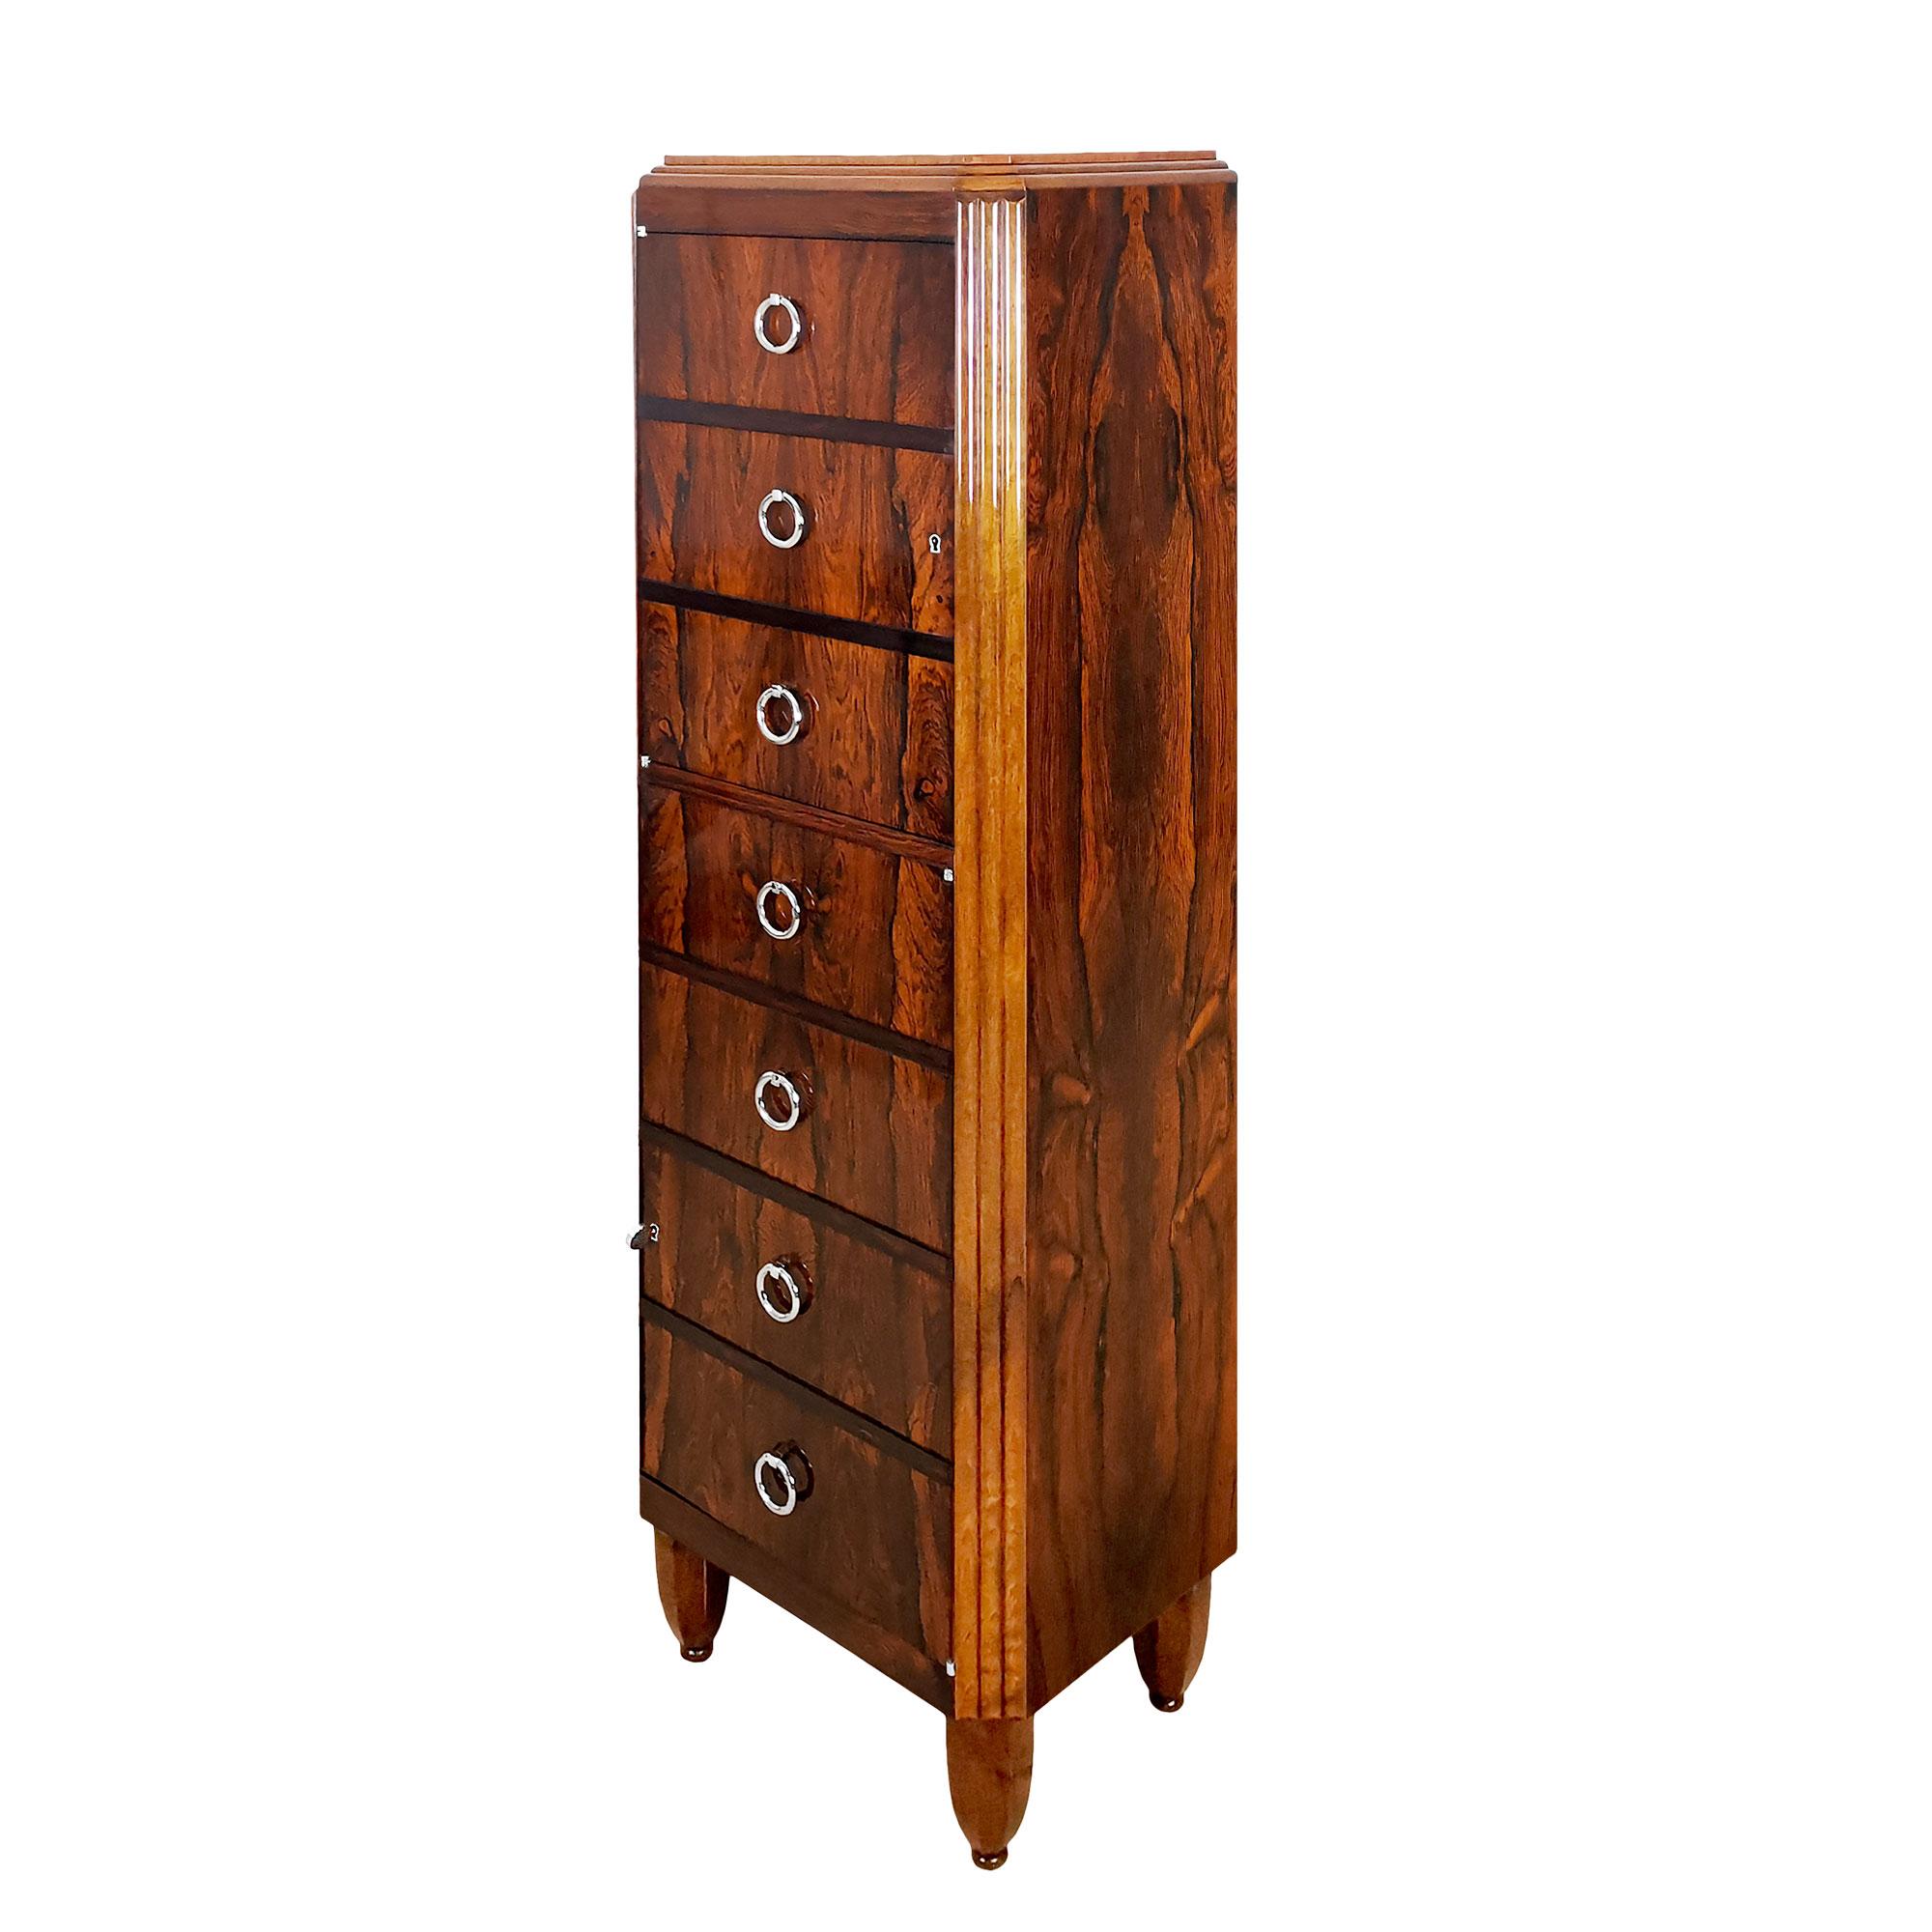 False Art Deco “semainier” with two doors (instead of drawers), structure in solid oak veneered with walnut, fluted uprights and feet in solid walnut. Oak interior. Nickel-plated brass handles and fittings. French polish. High quality.

France,